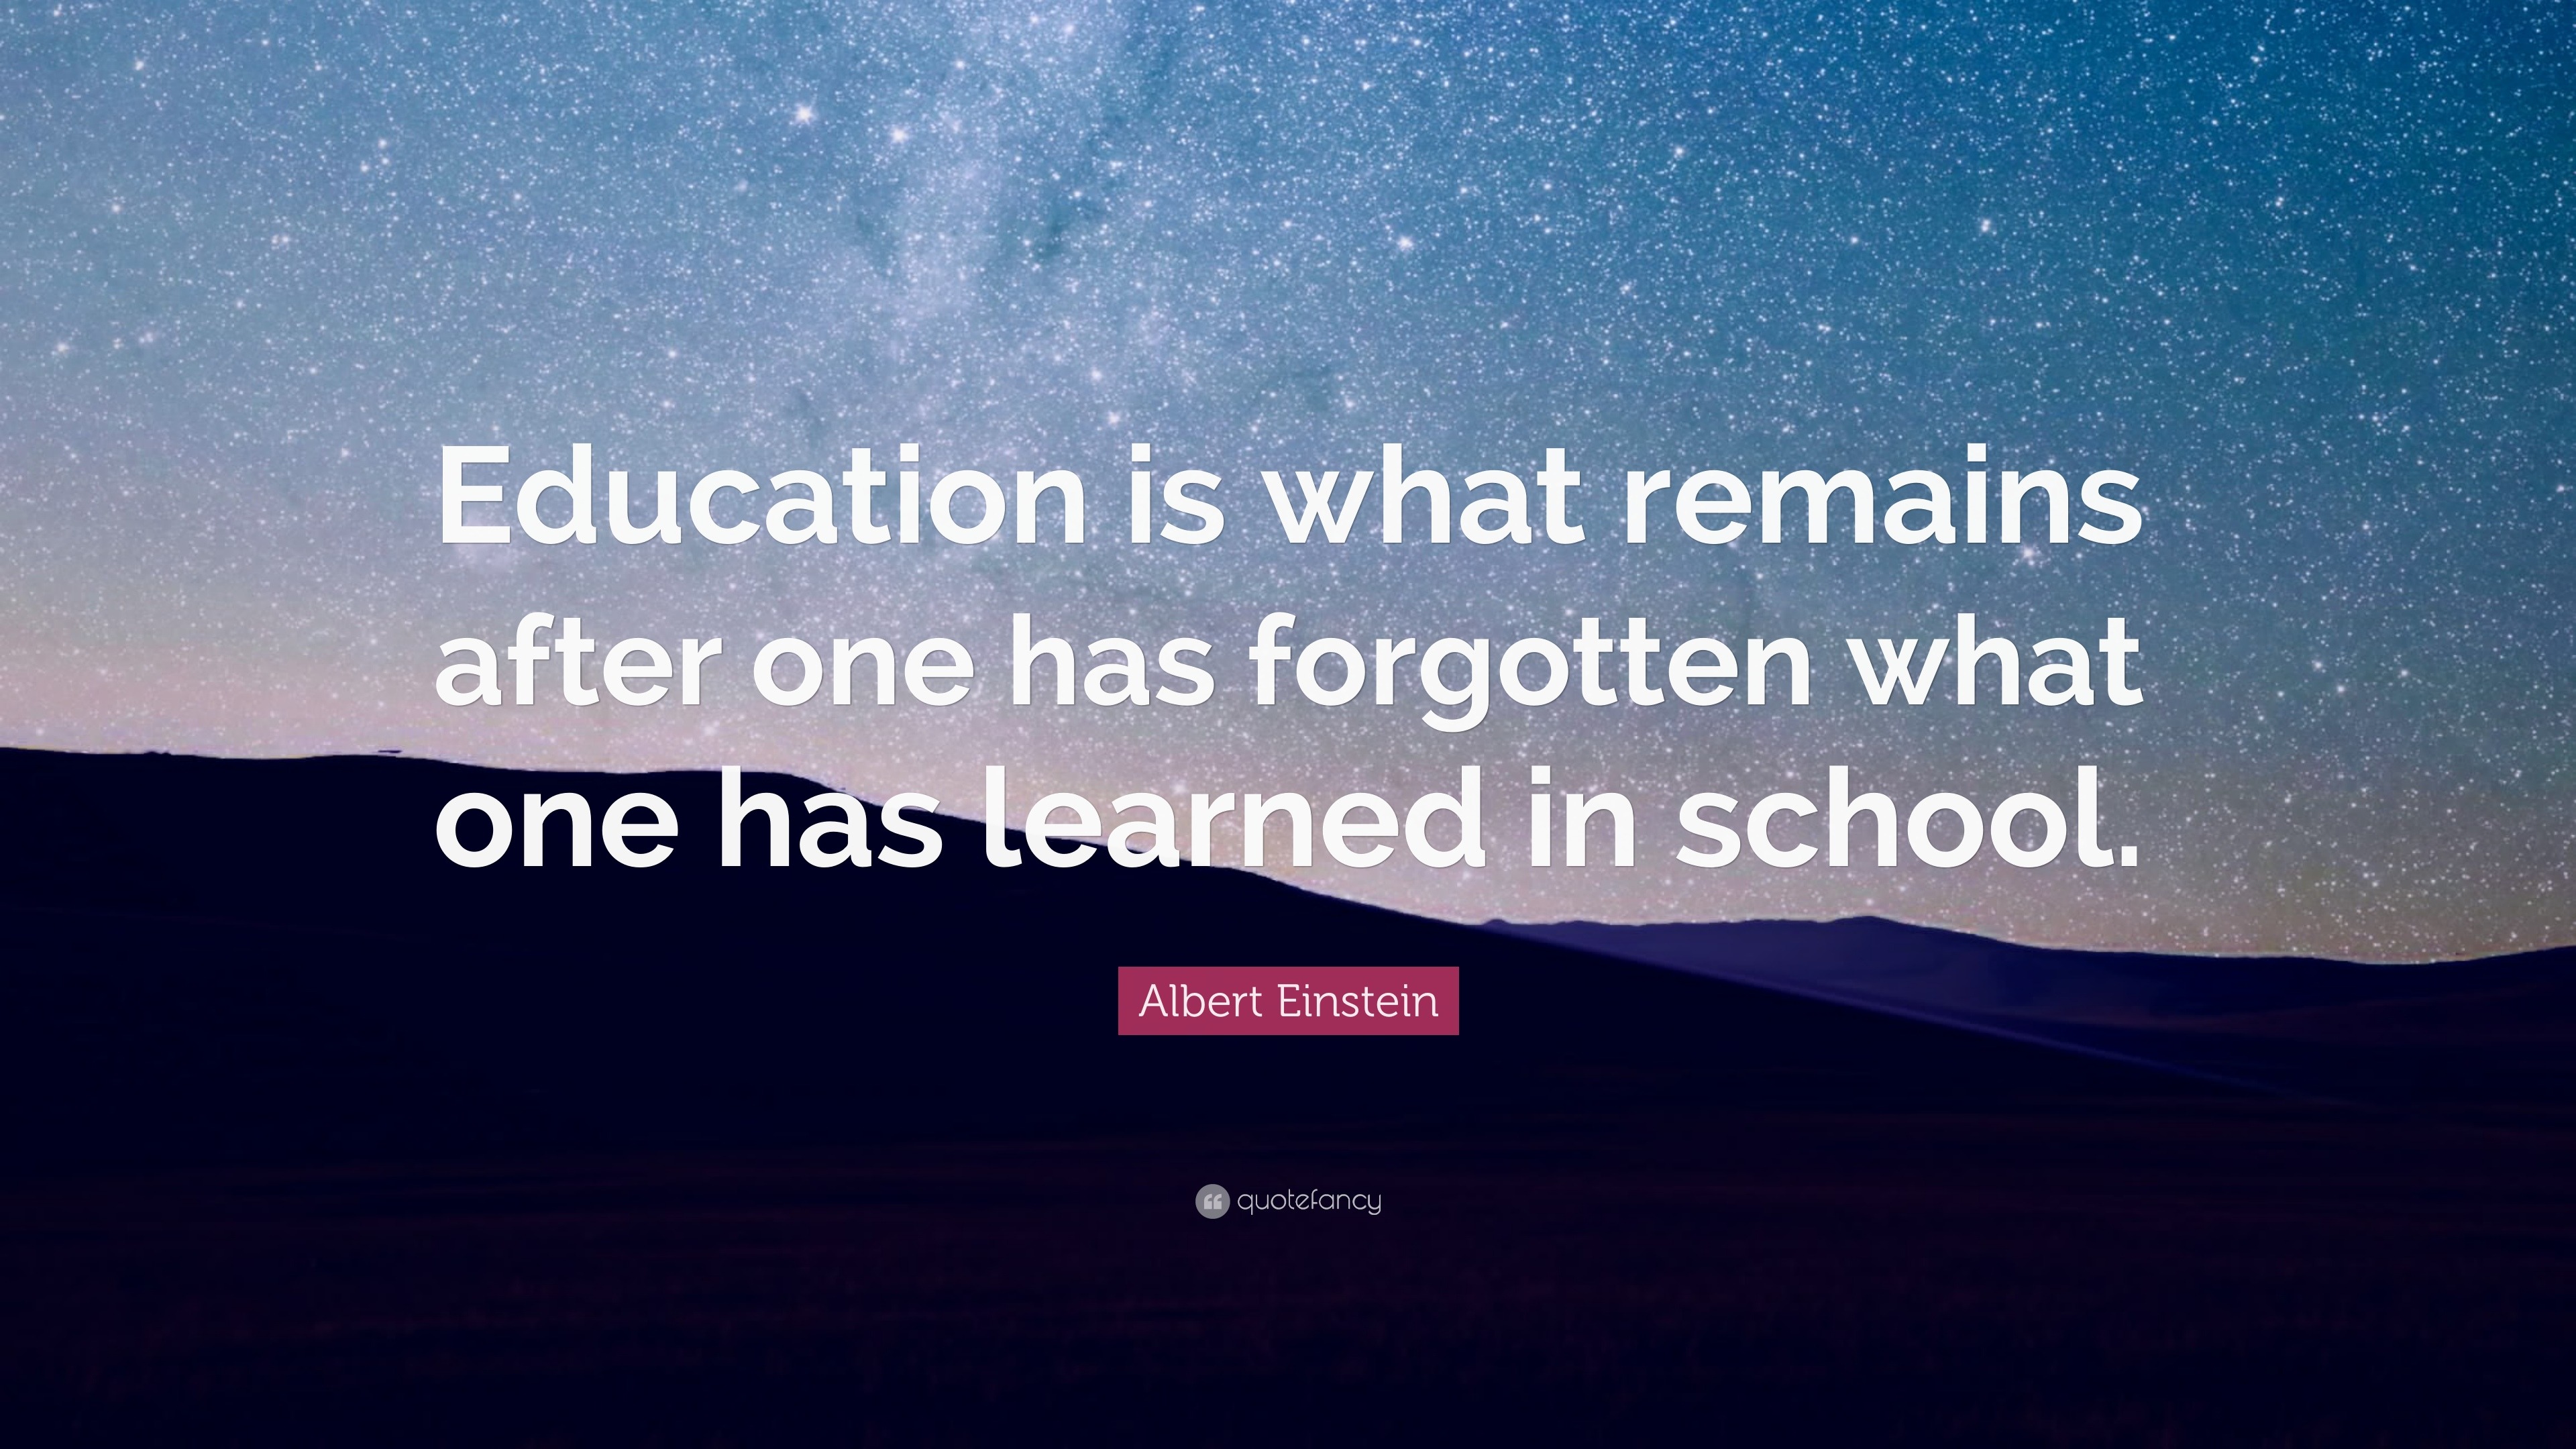 education is what remains when you have forgotten